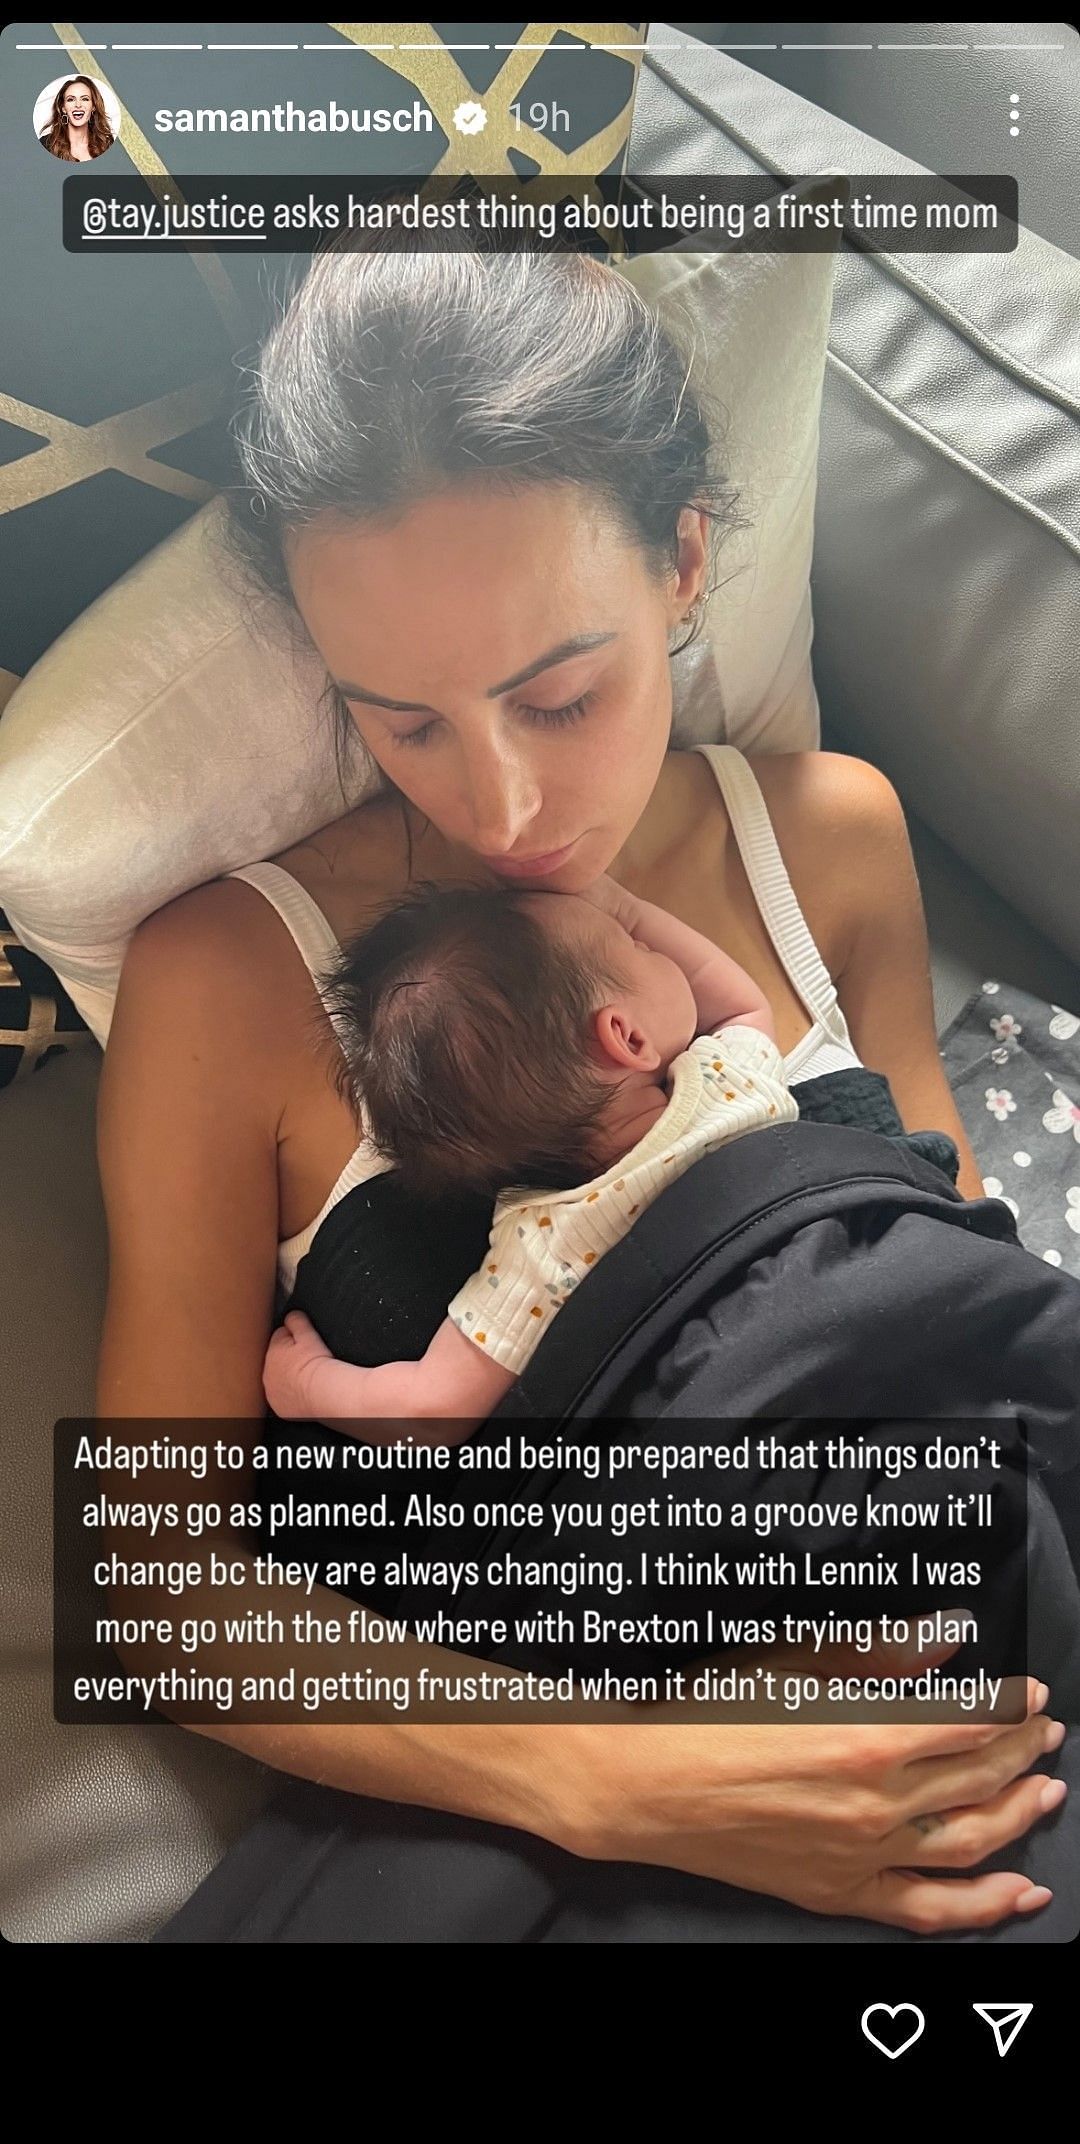 @tay.justice asks hardest thing about being a first time mom